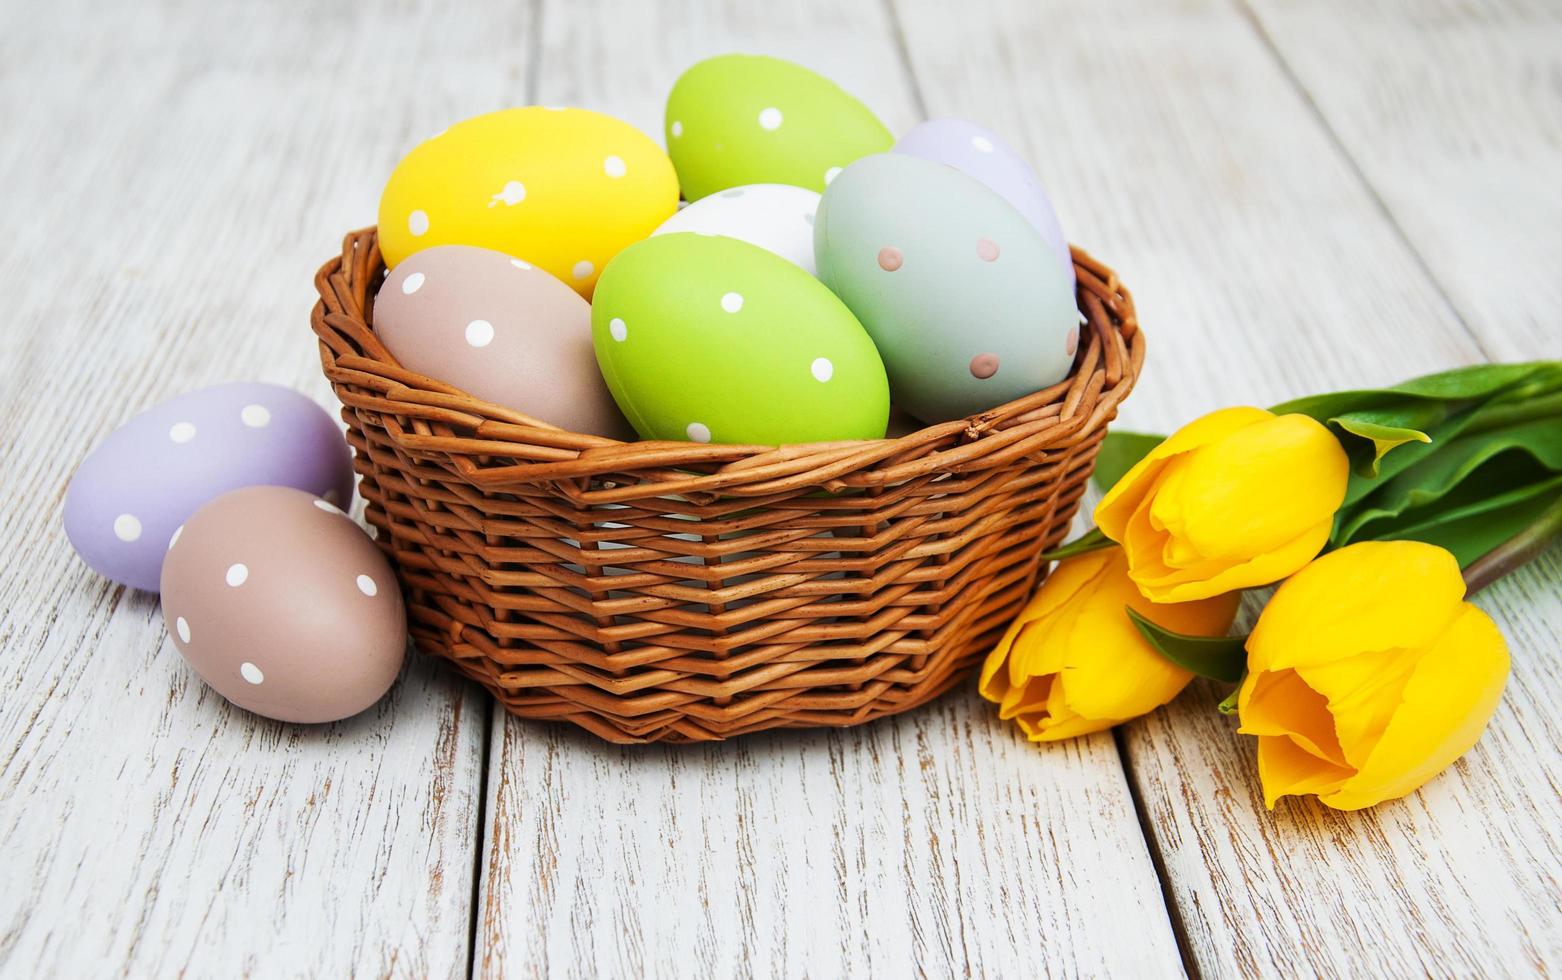 Basket with easter eggs and tulips photo